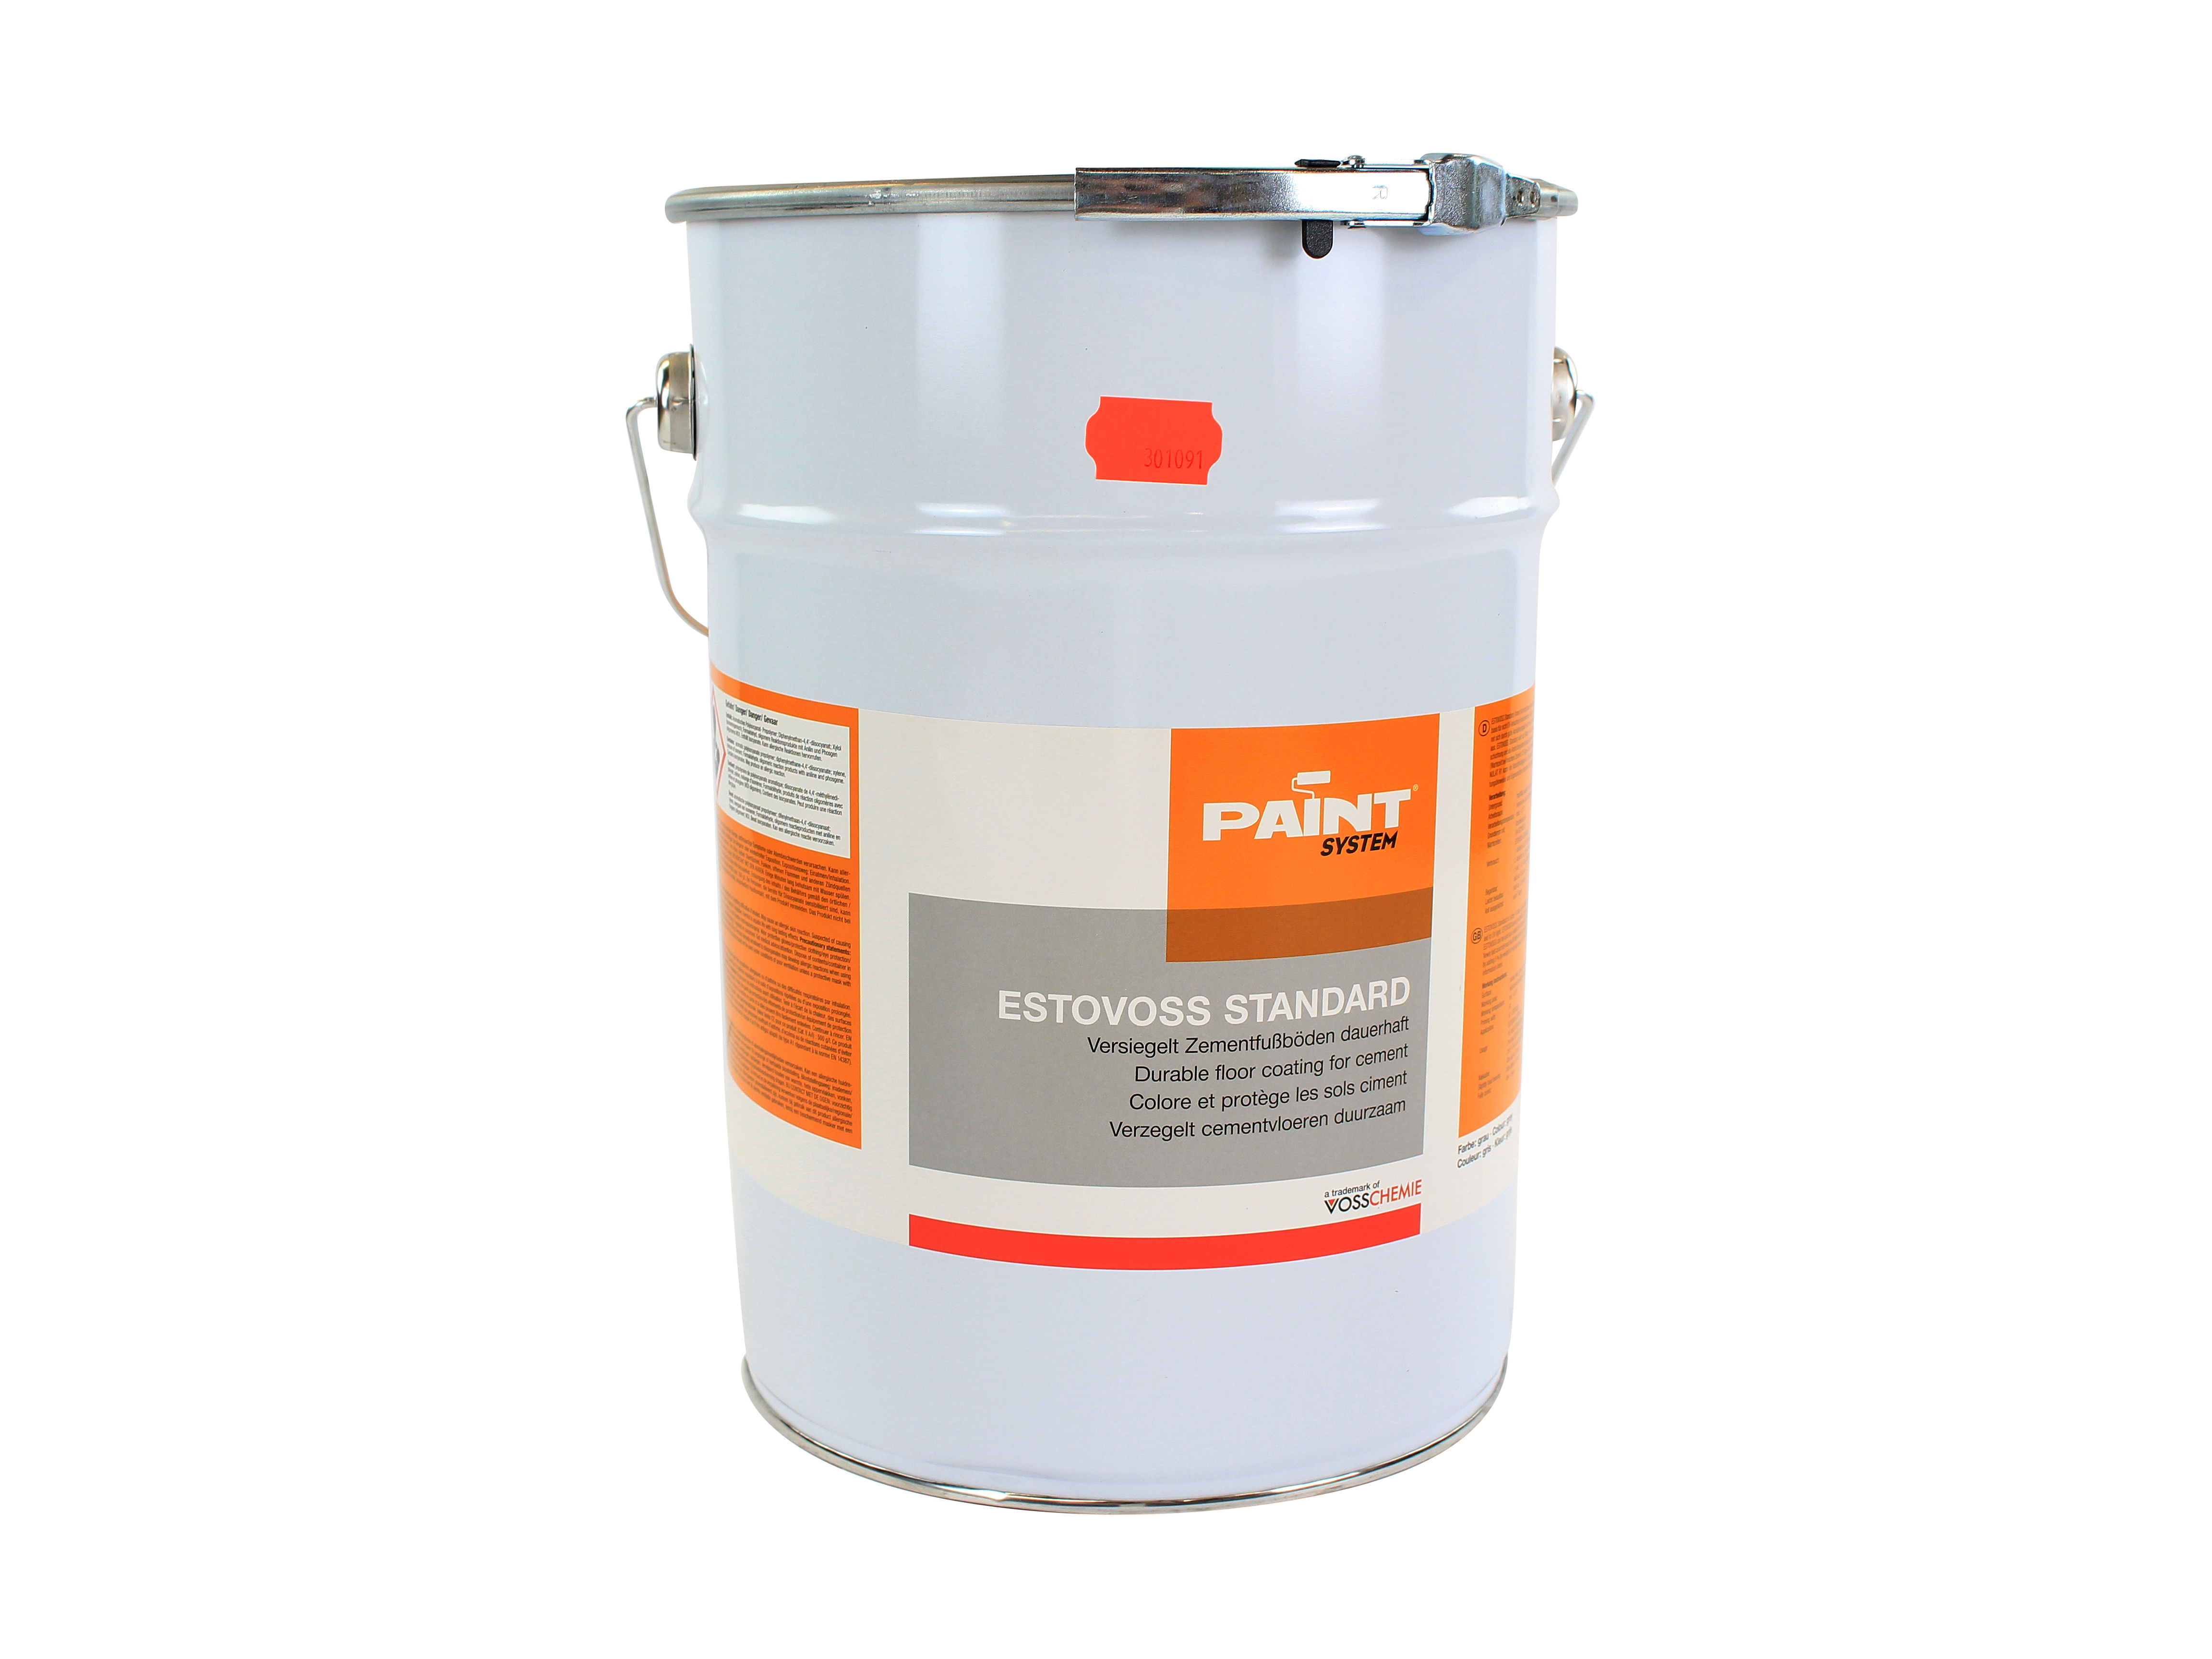 Floor paint - Waterproof topcoat for any surface 10 l